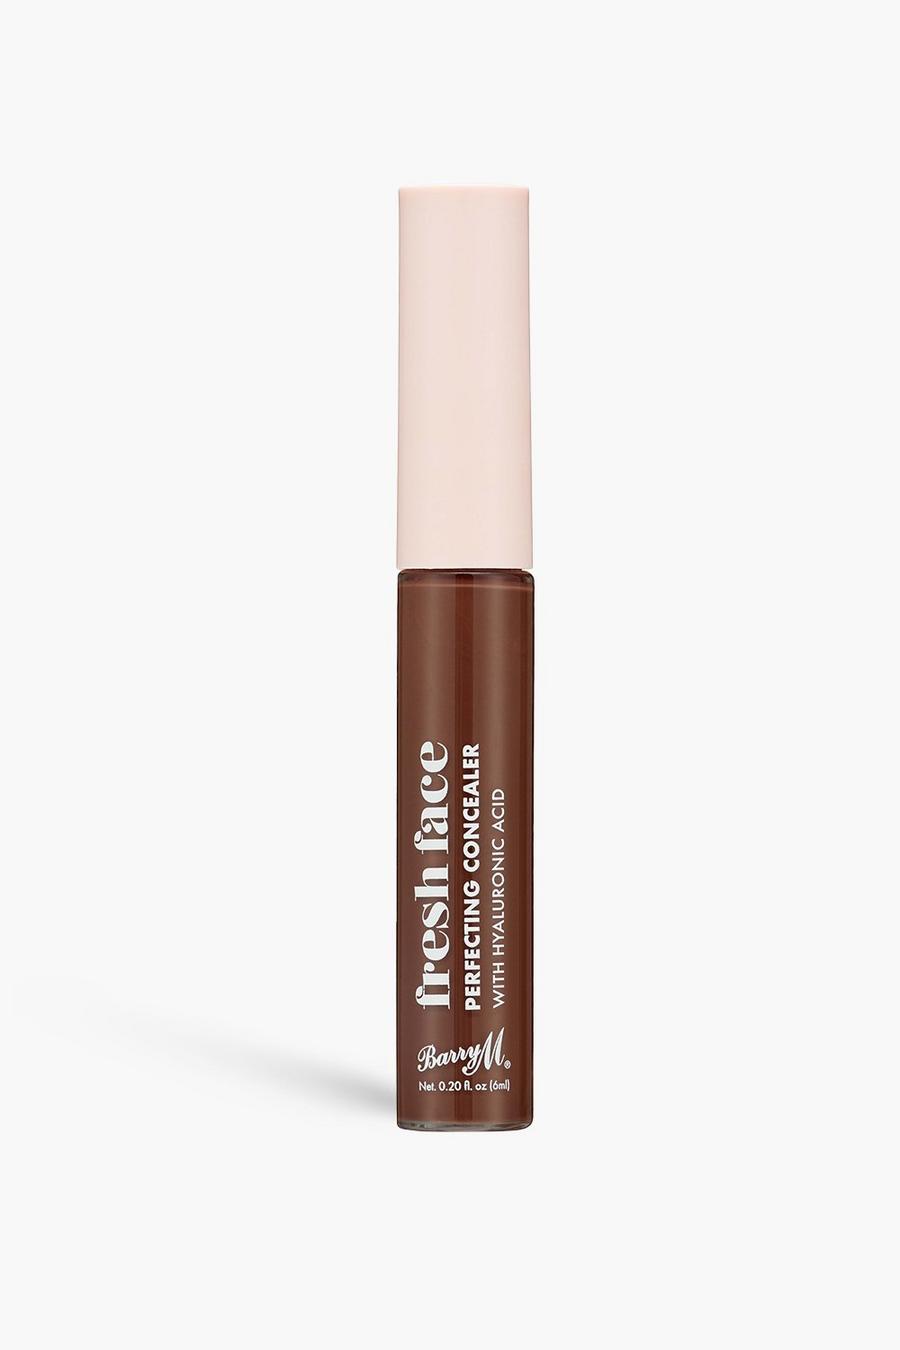 Barry M - Correttore Fresh Face Perfecting Concealer 20, Brown marrone